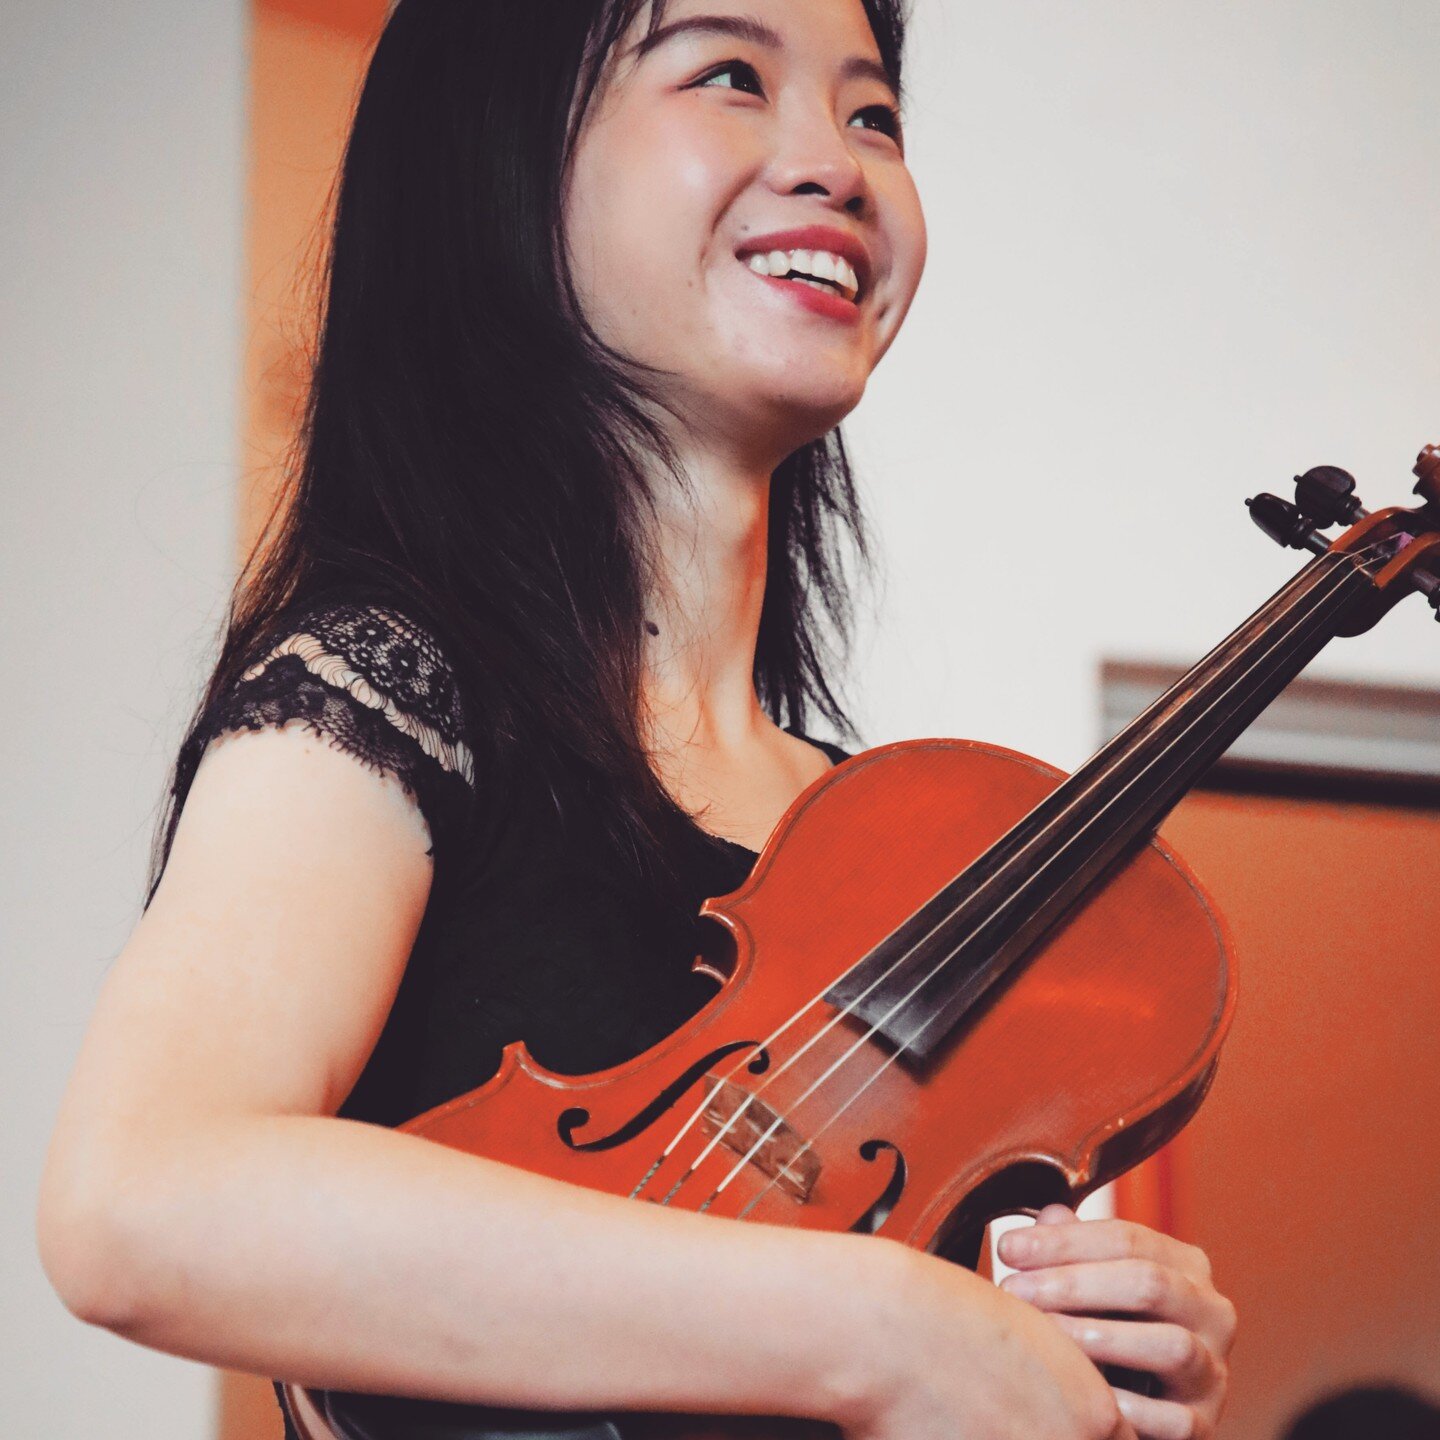 Our fabulous violinist @lulu__guo!

#violin #classical #chambermusic